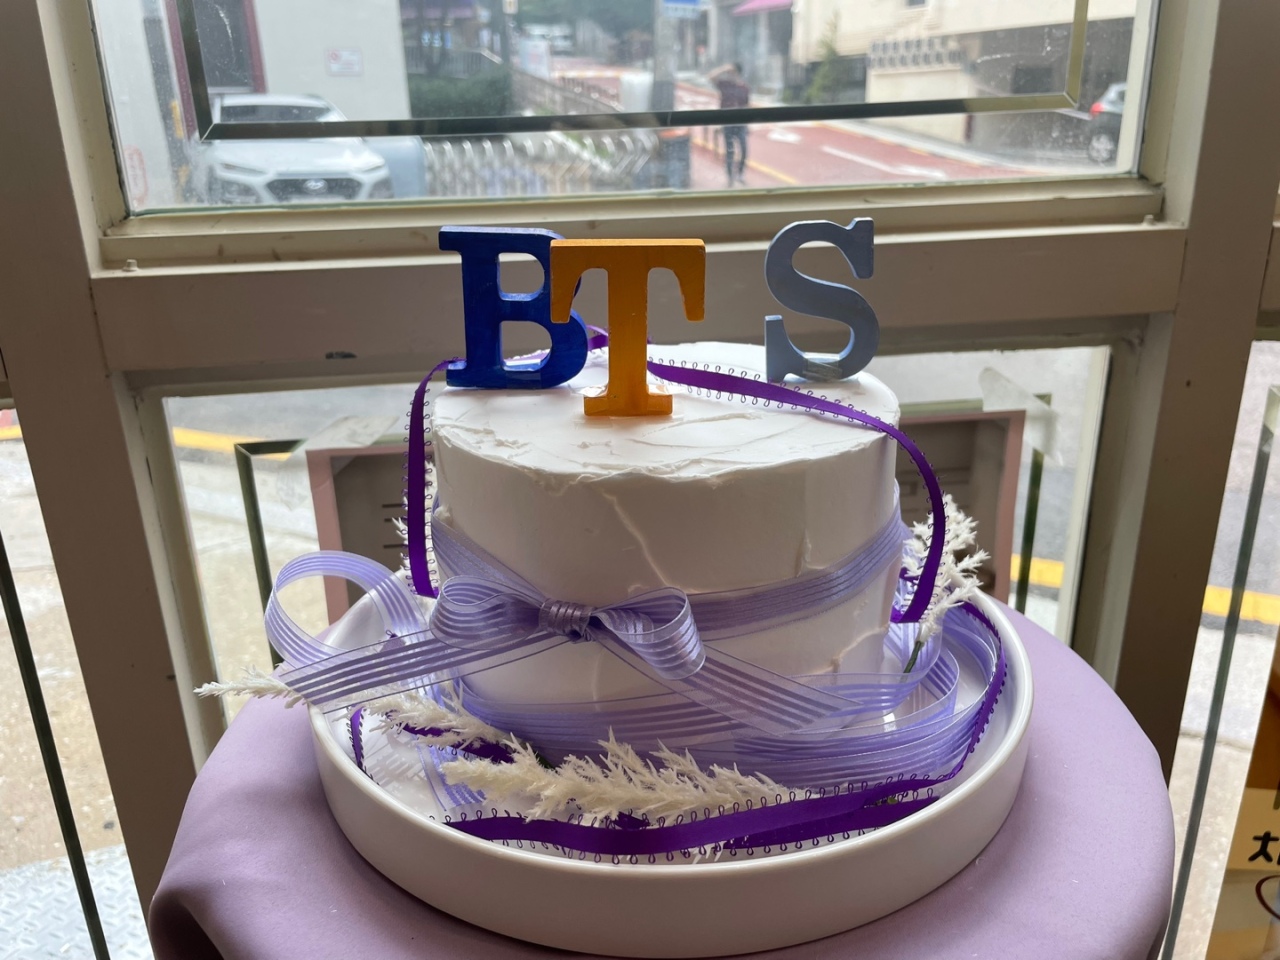 Fans show their affection by dedicating a purple birthday cake with blue, orange and violet candles on top. (Kweon Ha-bin/The Korea Herald)